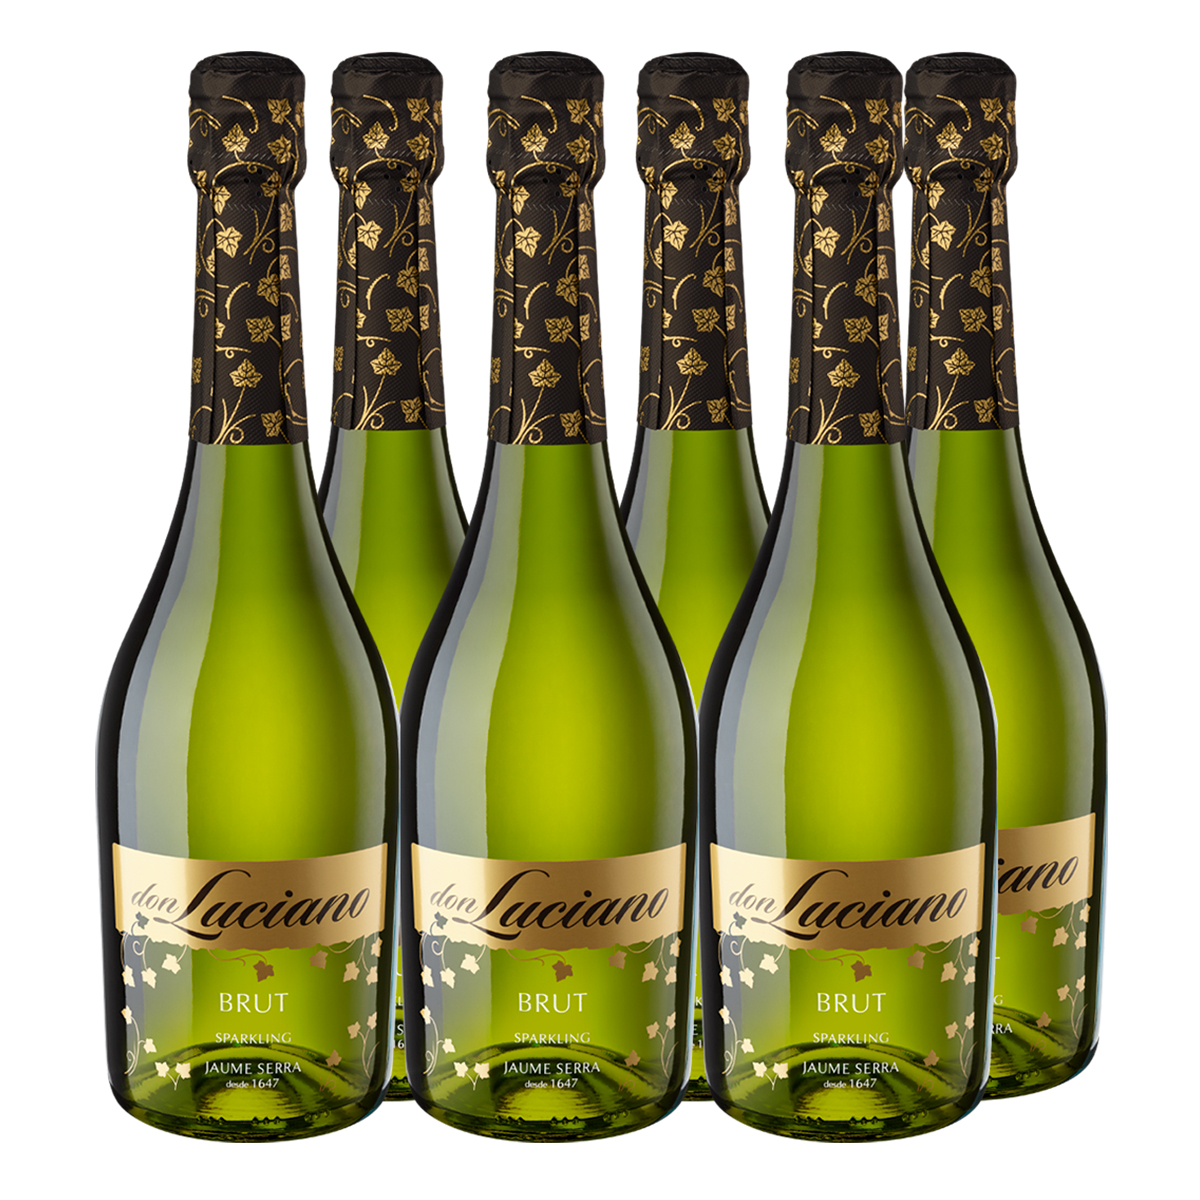 Don Luciano Brut 